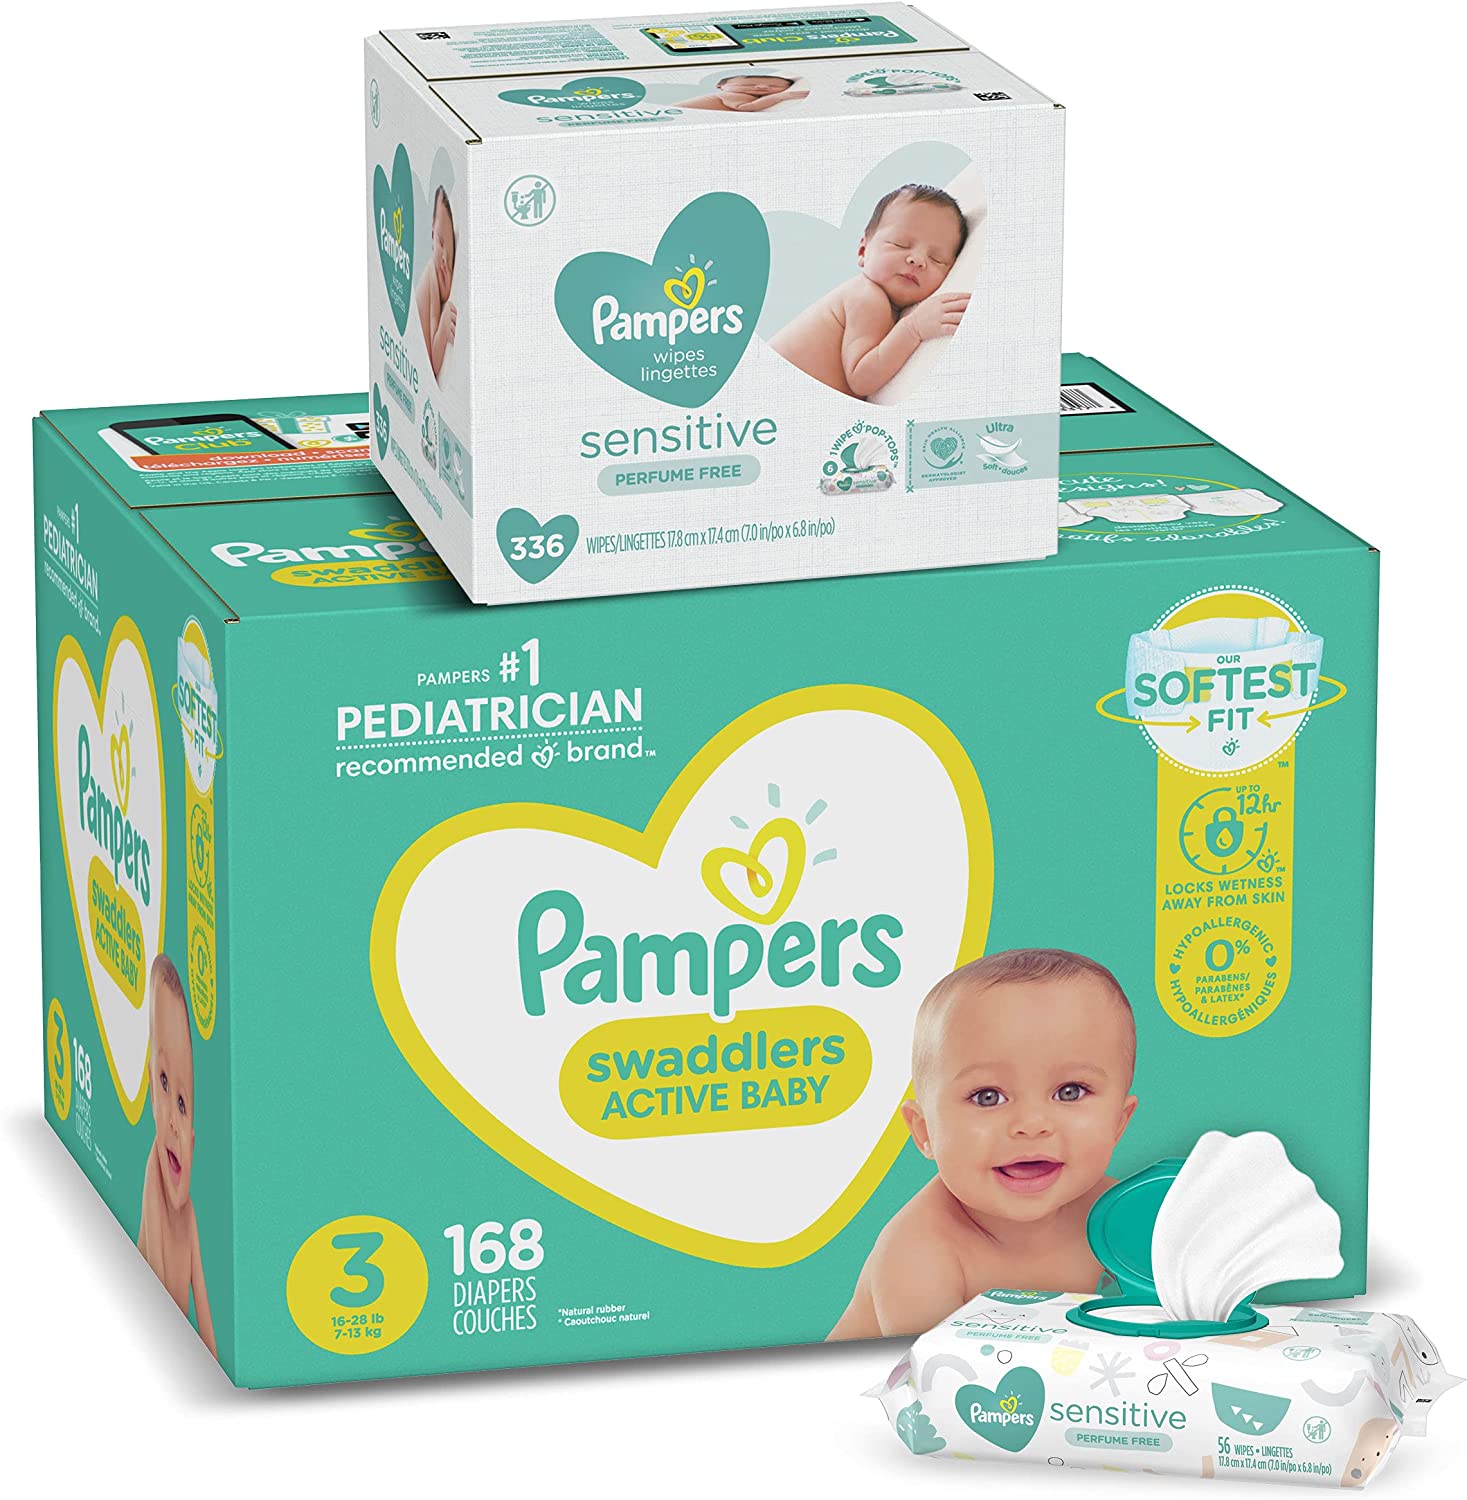 Baby Diaper Pampers® Swaddlers™ Tab Closure Size 7 Disposable Heavy  Absorbency